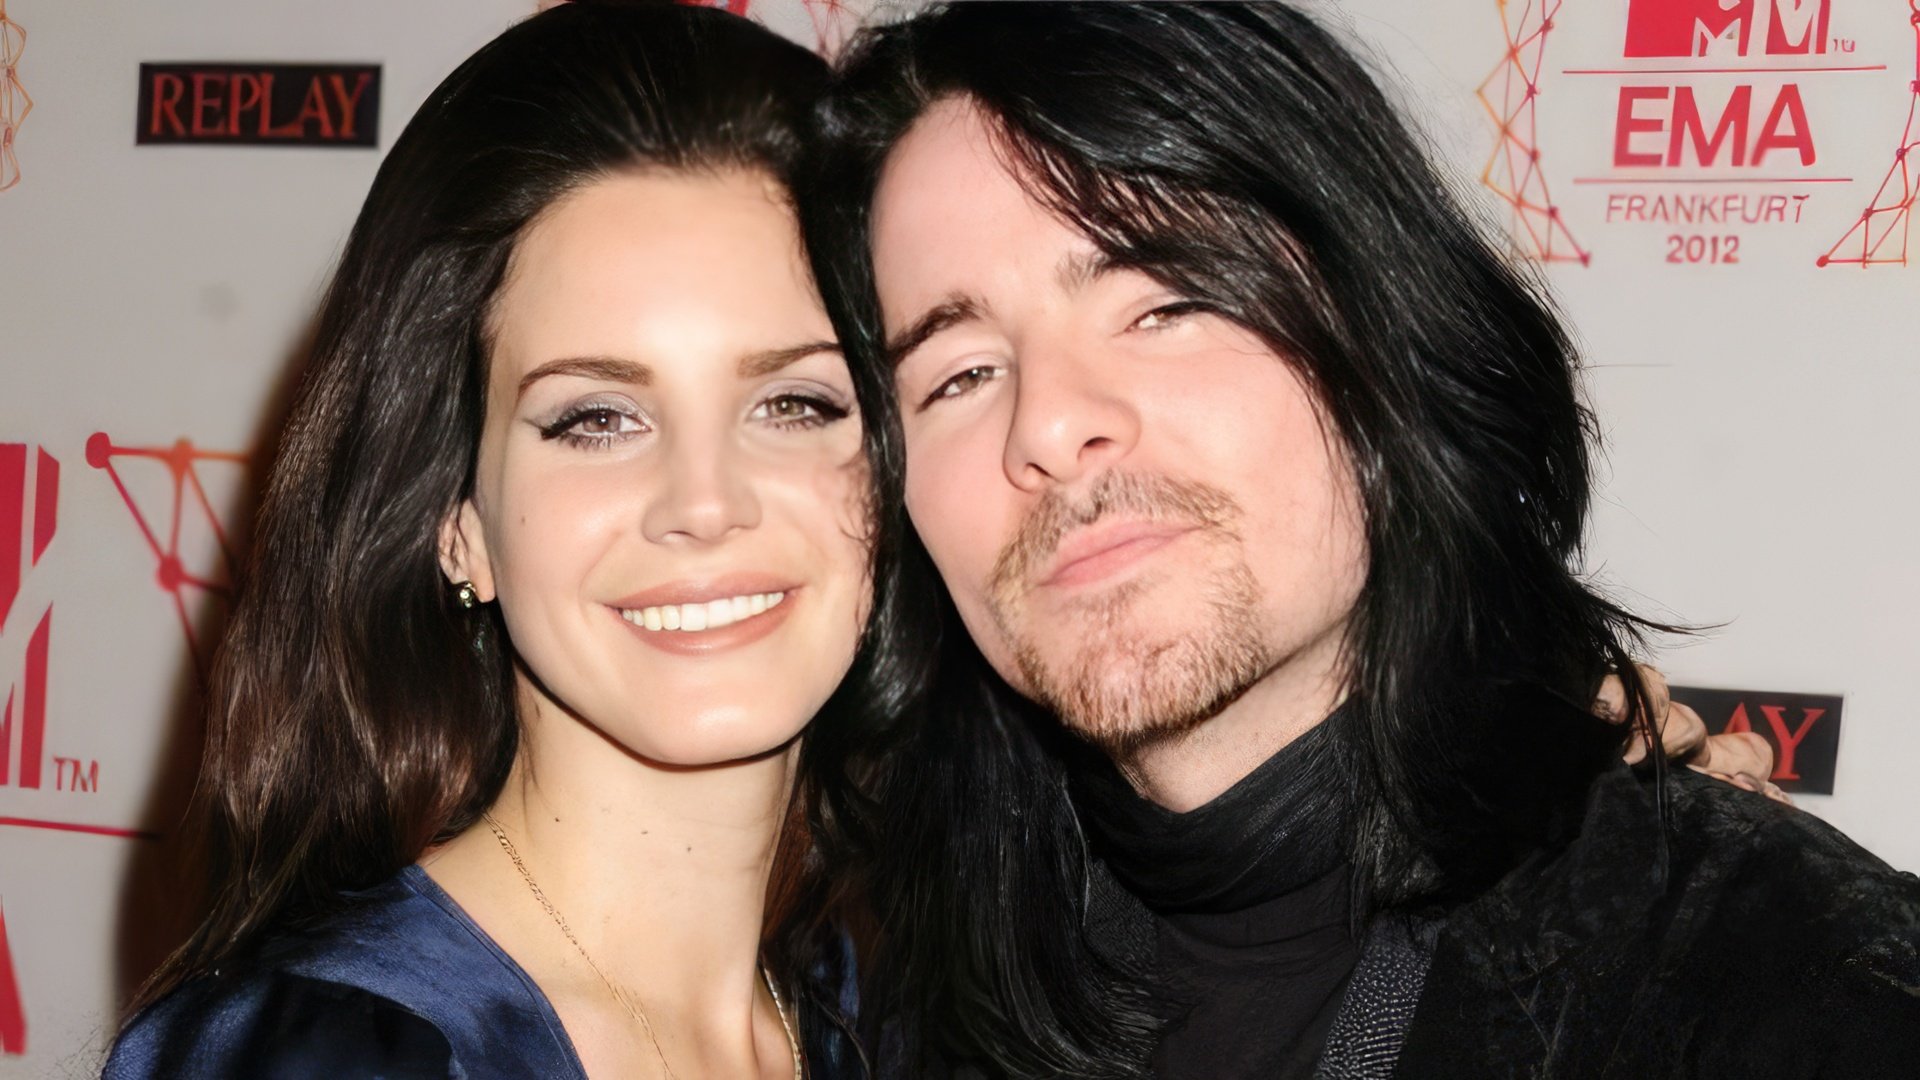 Pictured: Lana Del Rey and Barry James O’Neil